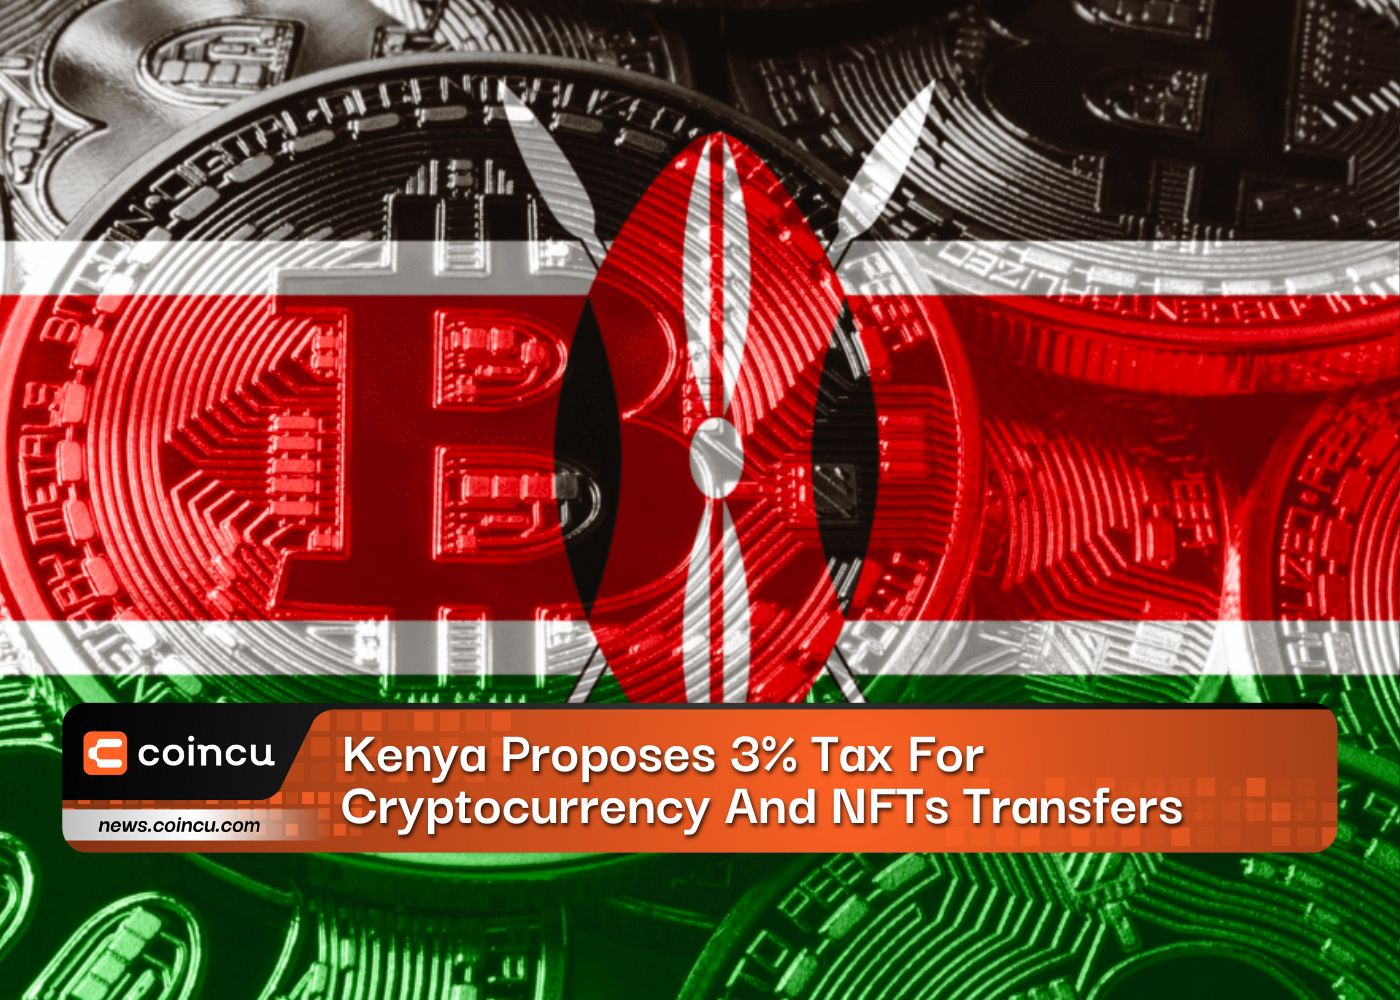 Kenya Proposes 3% Tax For Cryptocurrency And NFTs Transfers